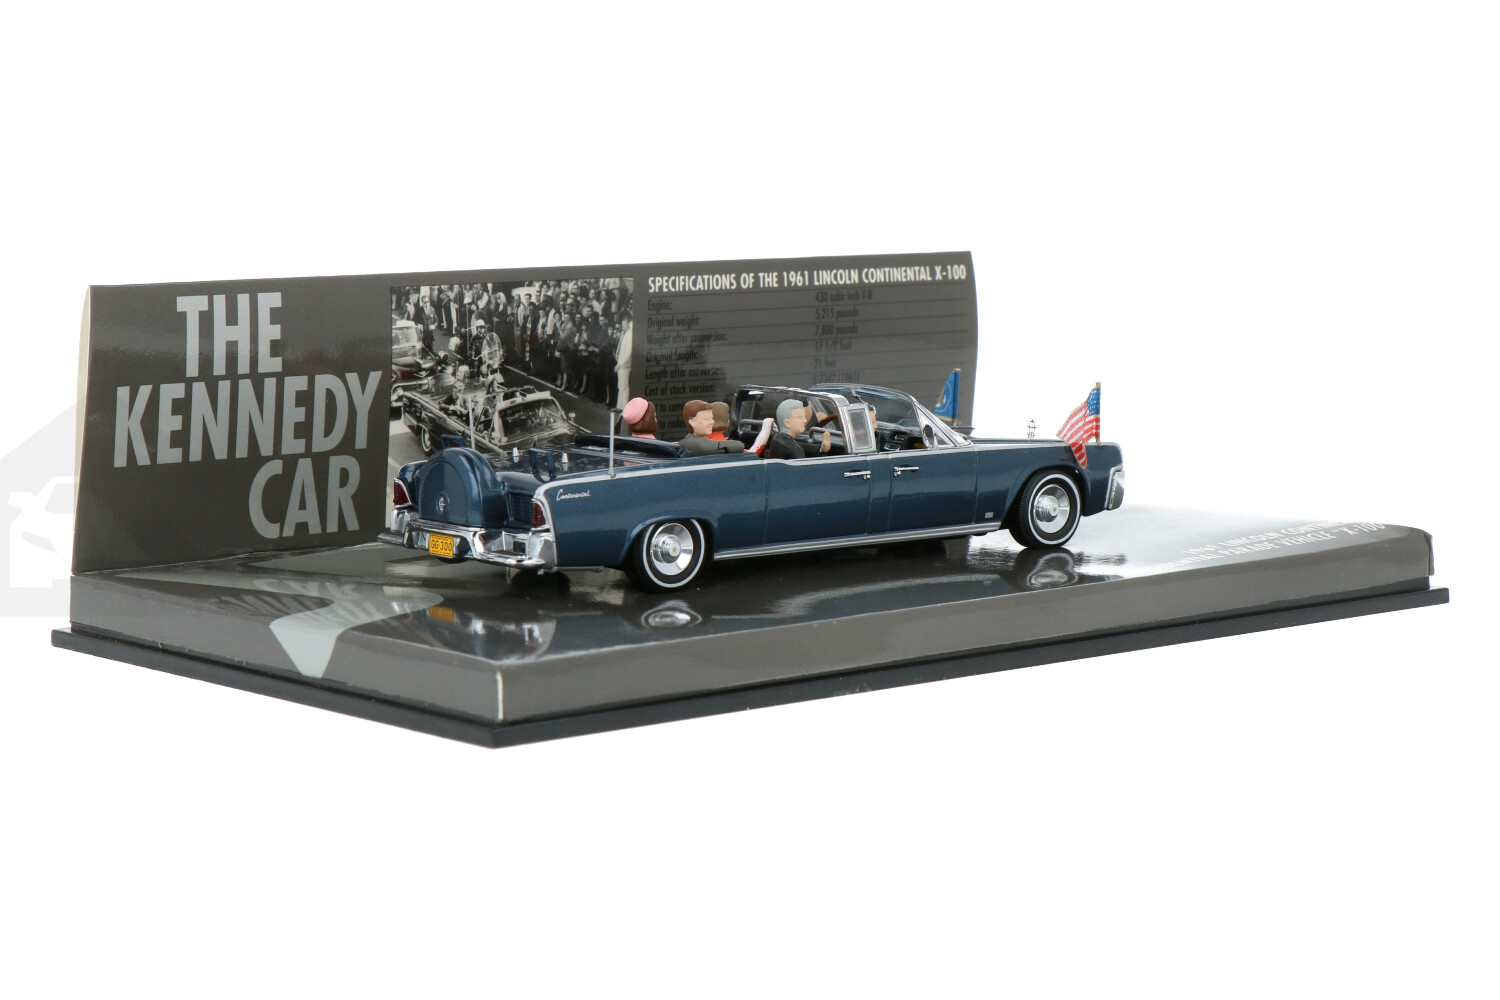 Lincoln-Continental-President-Parade-Vehicle-Kennedy-430086100_33154012138028876-MinichampsLincoln-Continental-President-Parade-Vehicle-Kennedy-430086100_Houseofmodelcars_.jpg